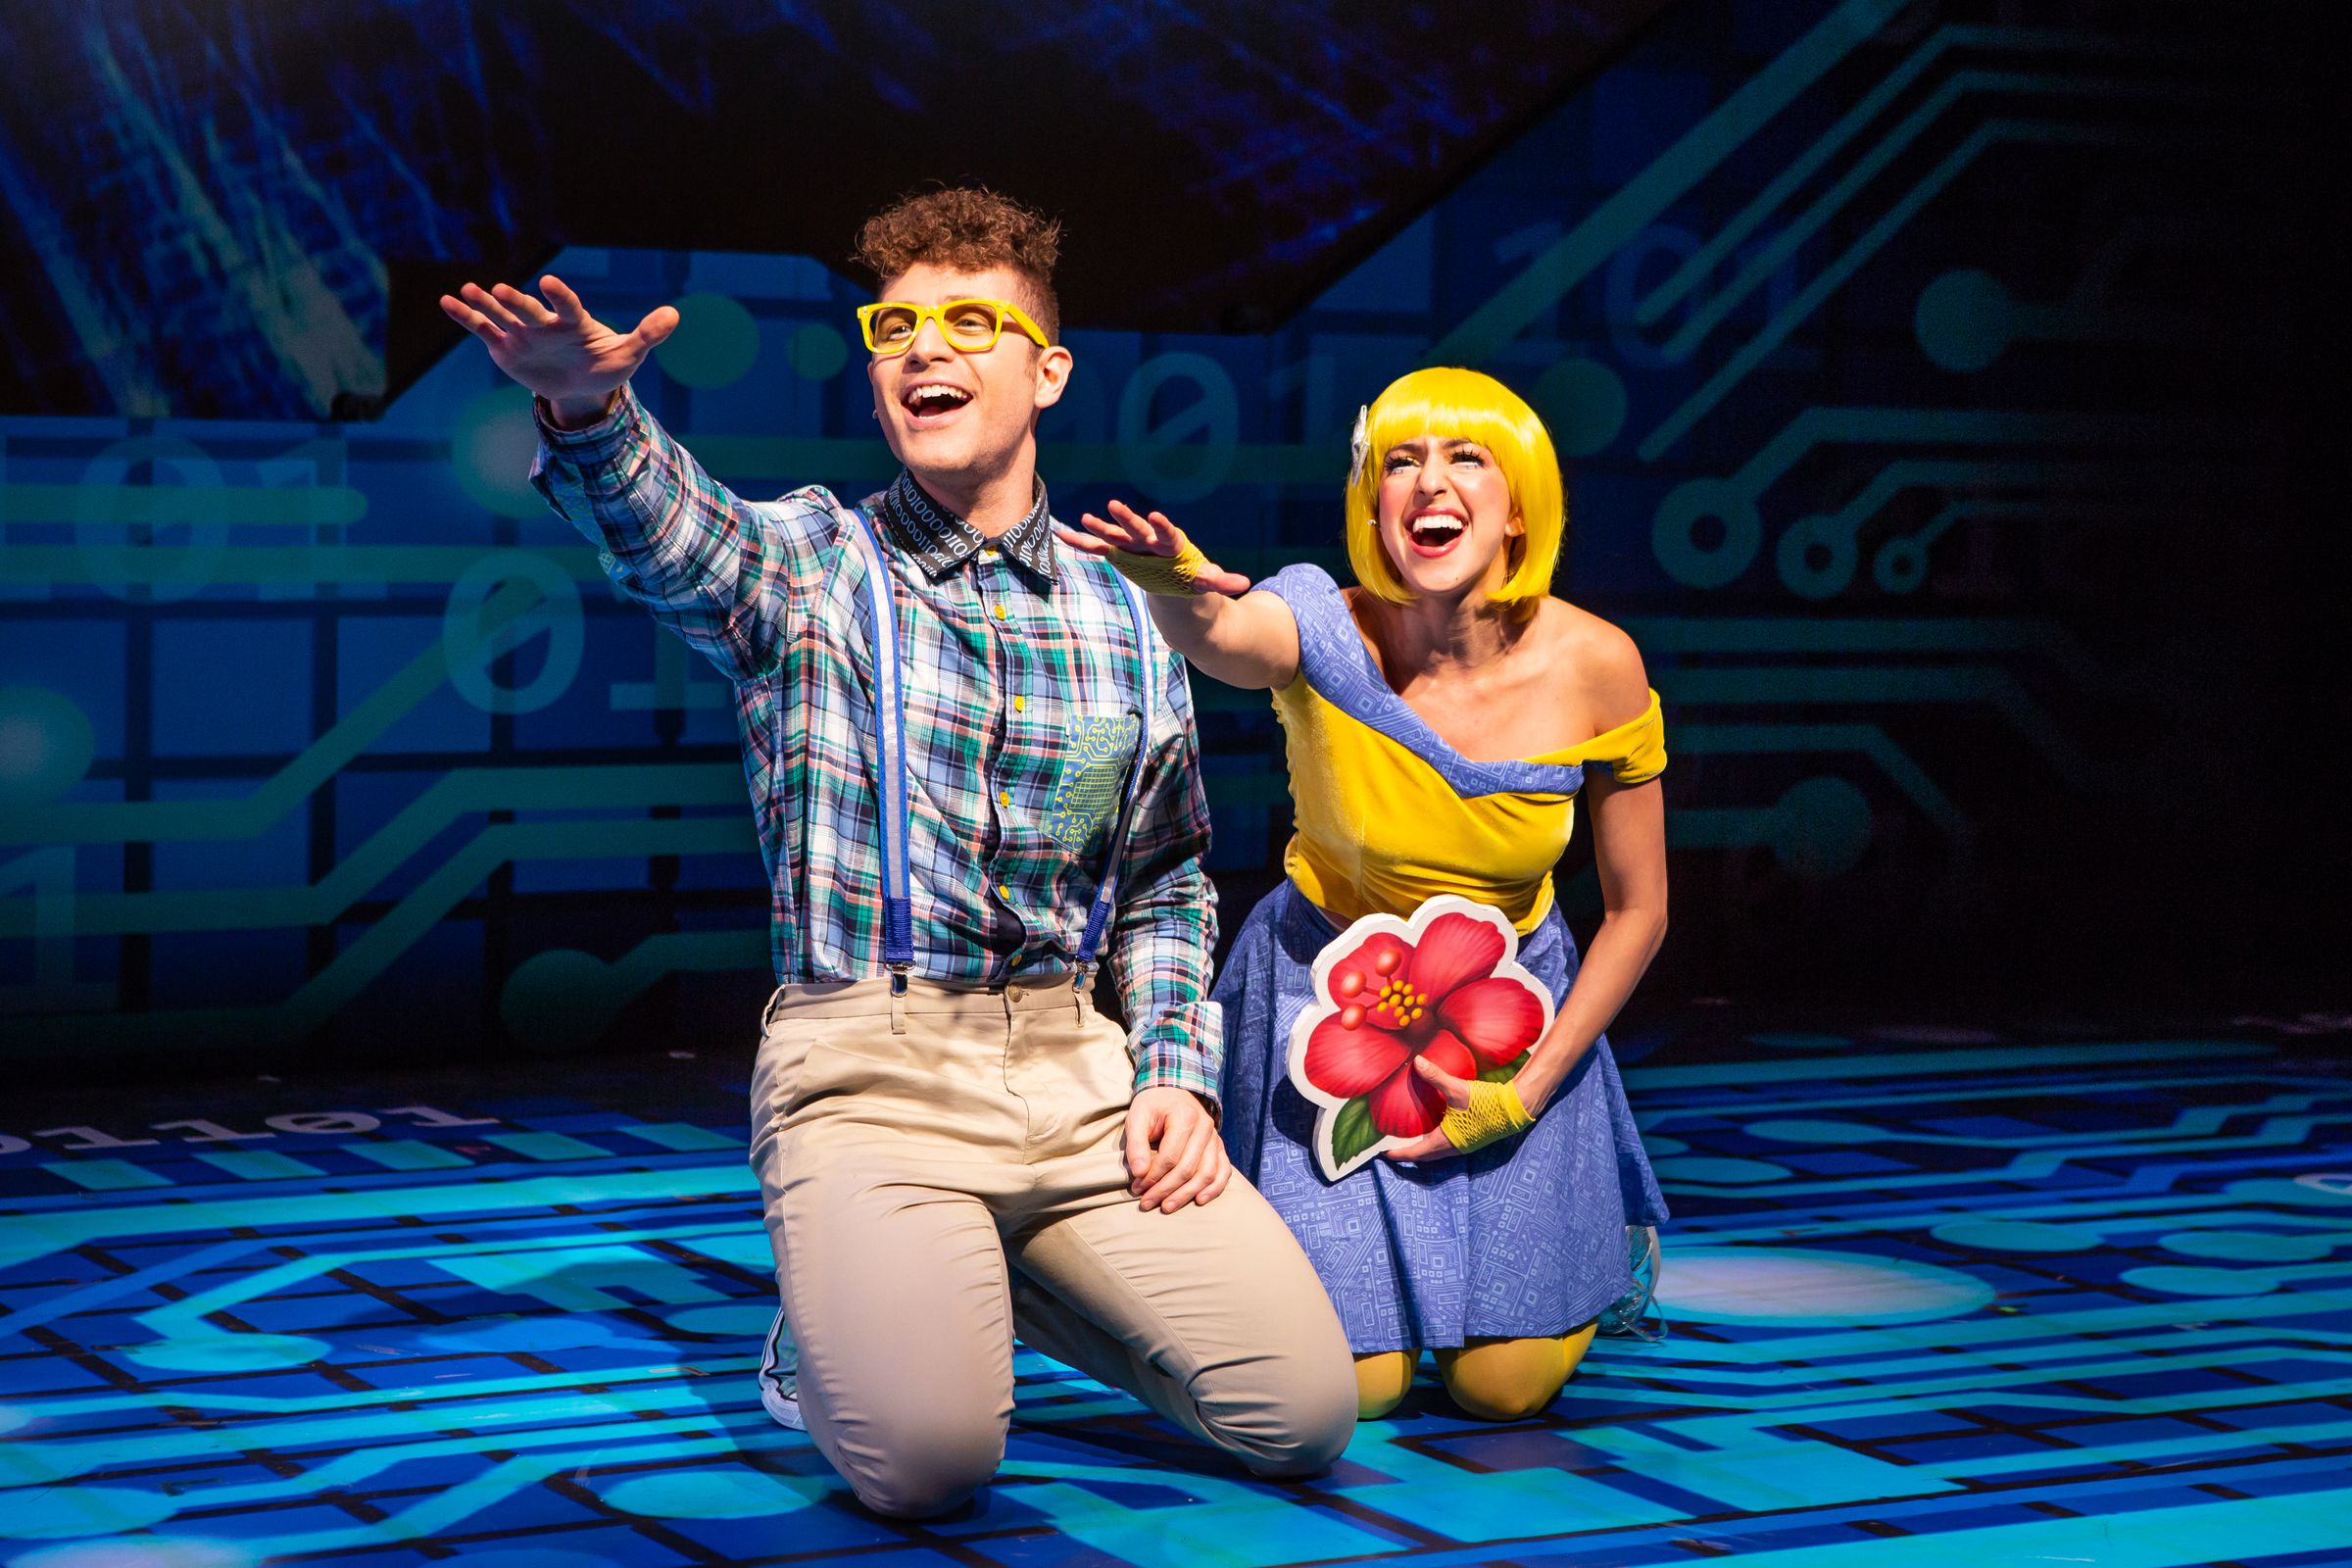 Keith Harrison (Nerd Face) and Laura Nicole Harrison (Smize) in the musical Emojiland